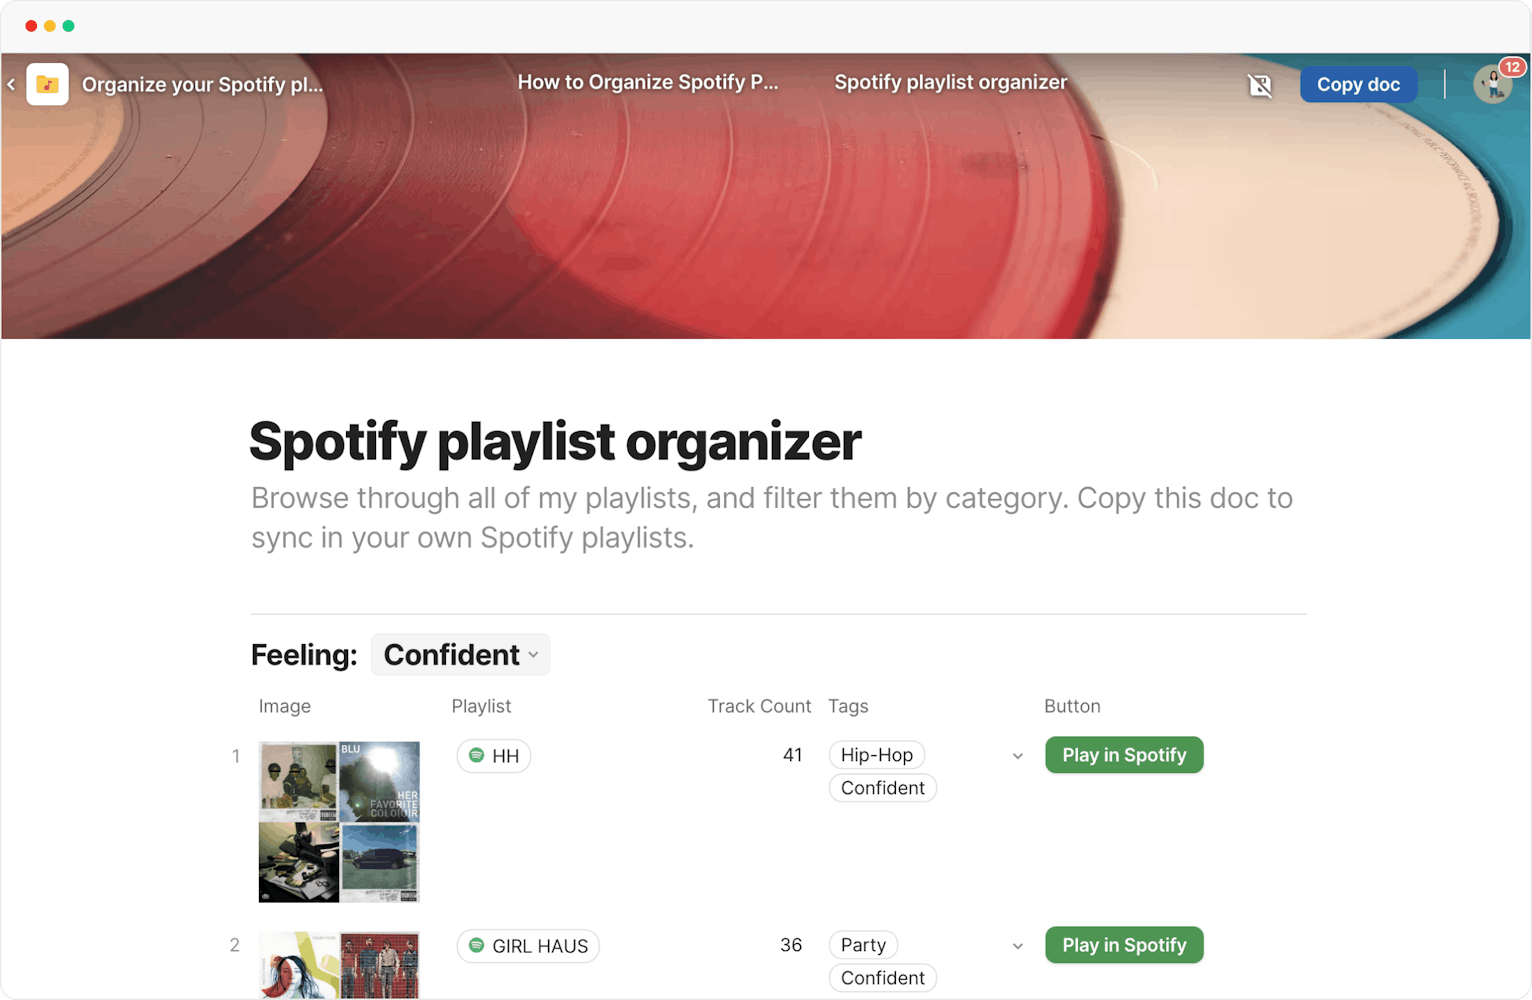 Spotify playlist organizer built in Coda - shows album images, track count, and tags with a button to play in Spotify